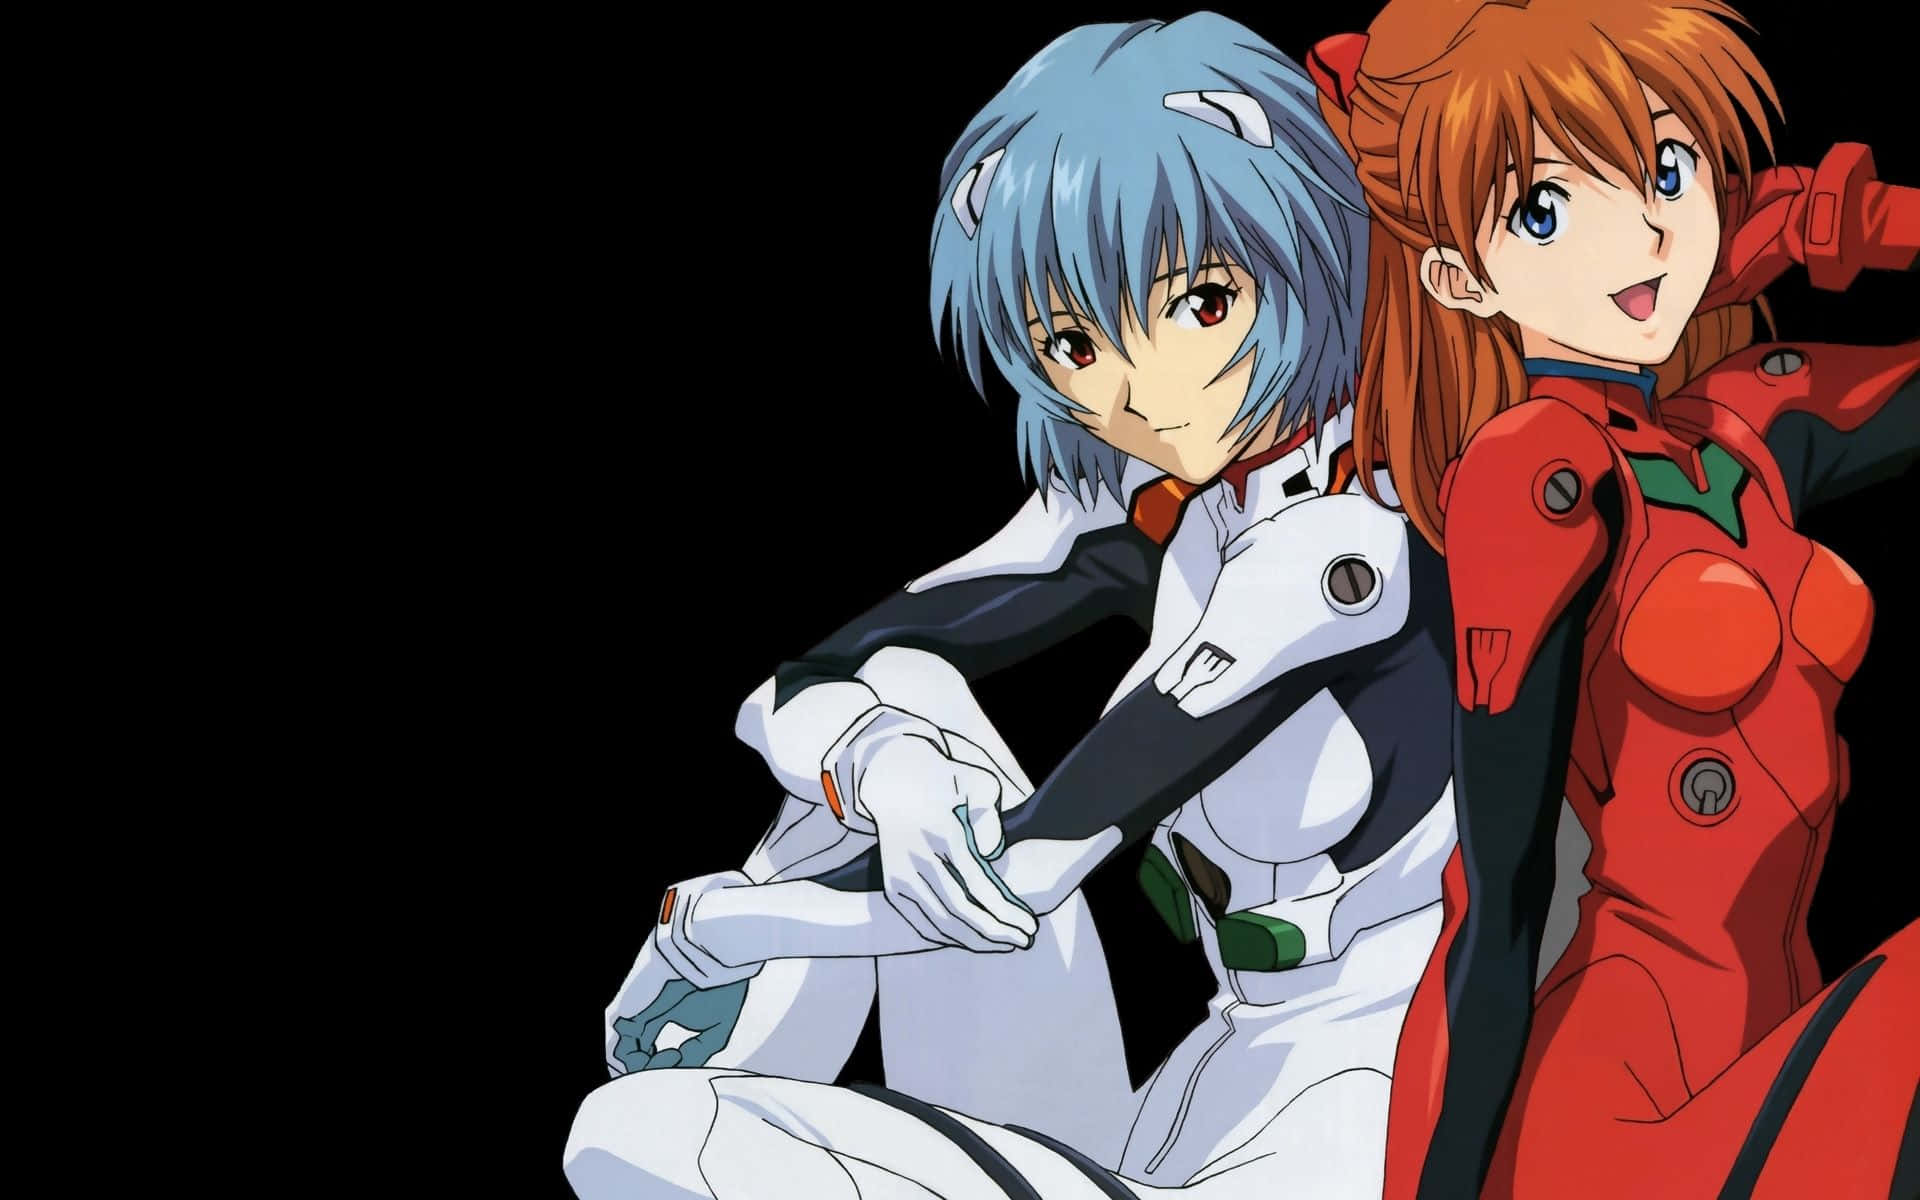 Intriguing Rei Ayanami in a mysterious scene Wallpaper